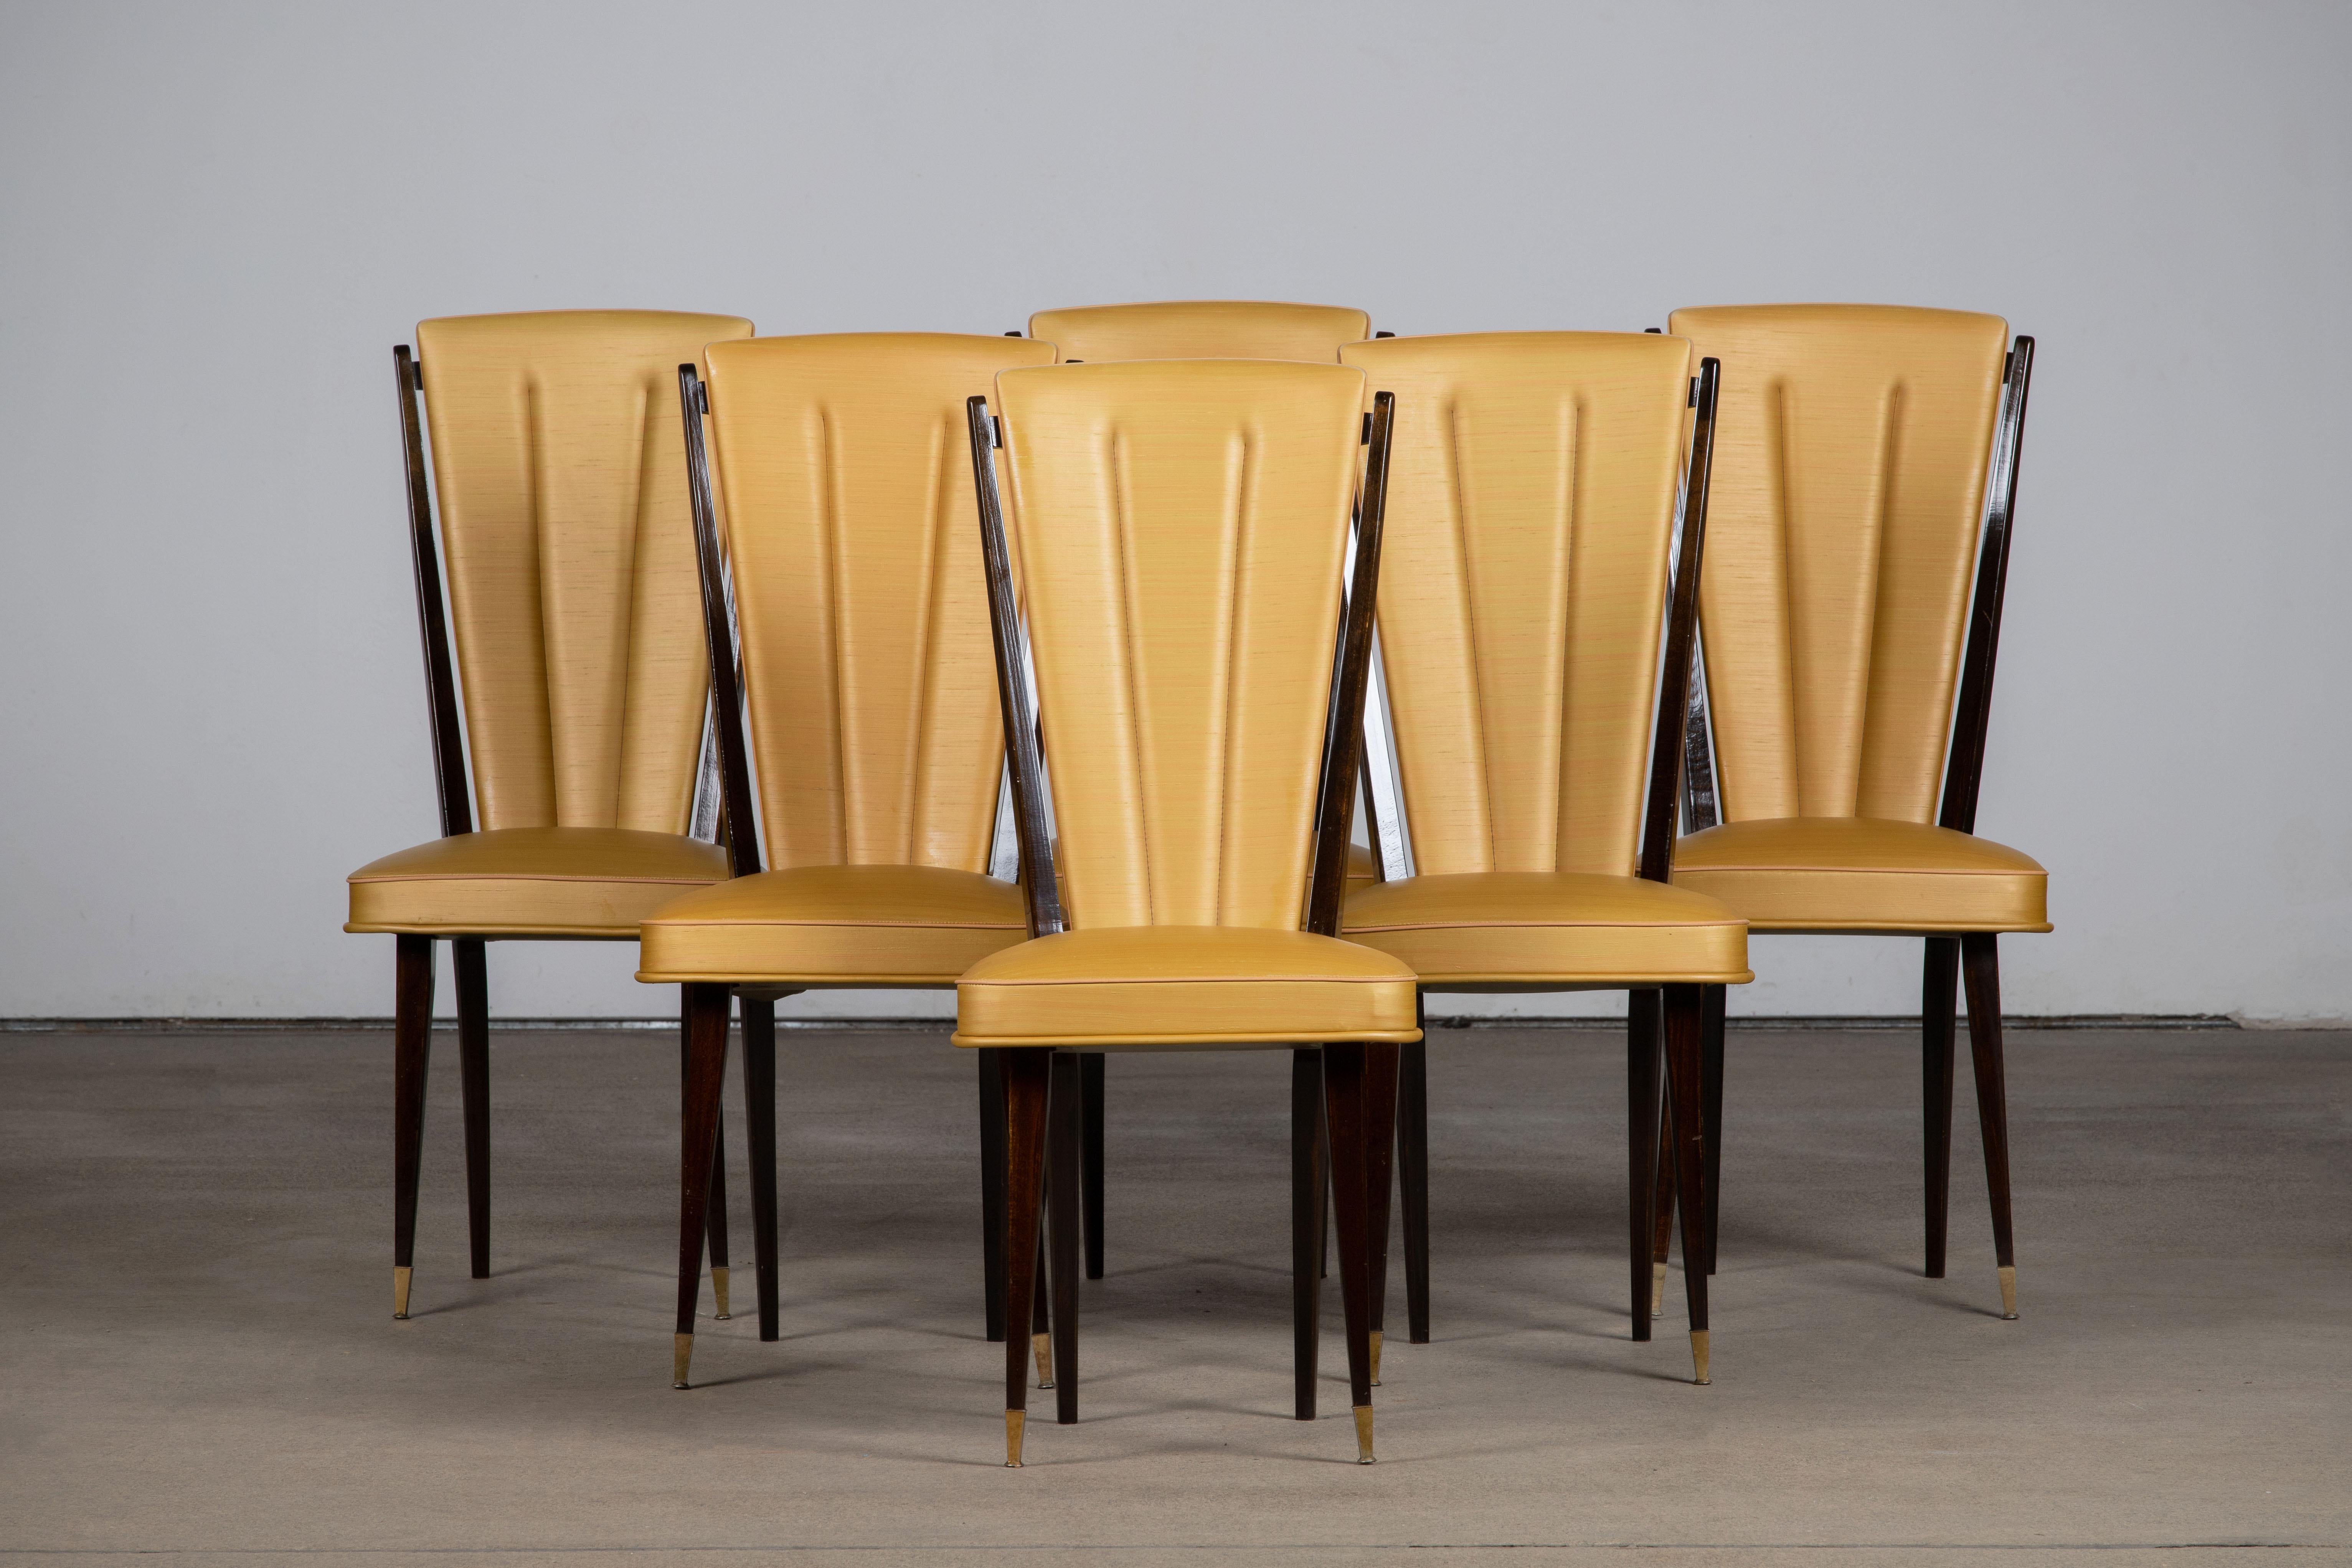 Set of six upholstered high back chairs covered in yellow vynil, exhibiting traditional French design elements in a deep oak finish.

In the style of René Prou, Albert-Lucien Guenot, Pomone, André Arbus, Baptistin Spade, Charles Dudouyt, Herman